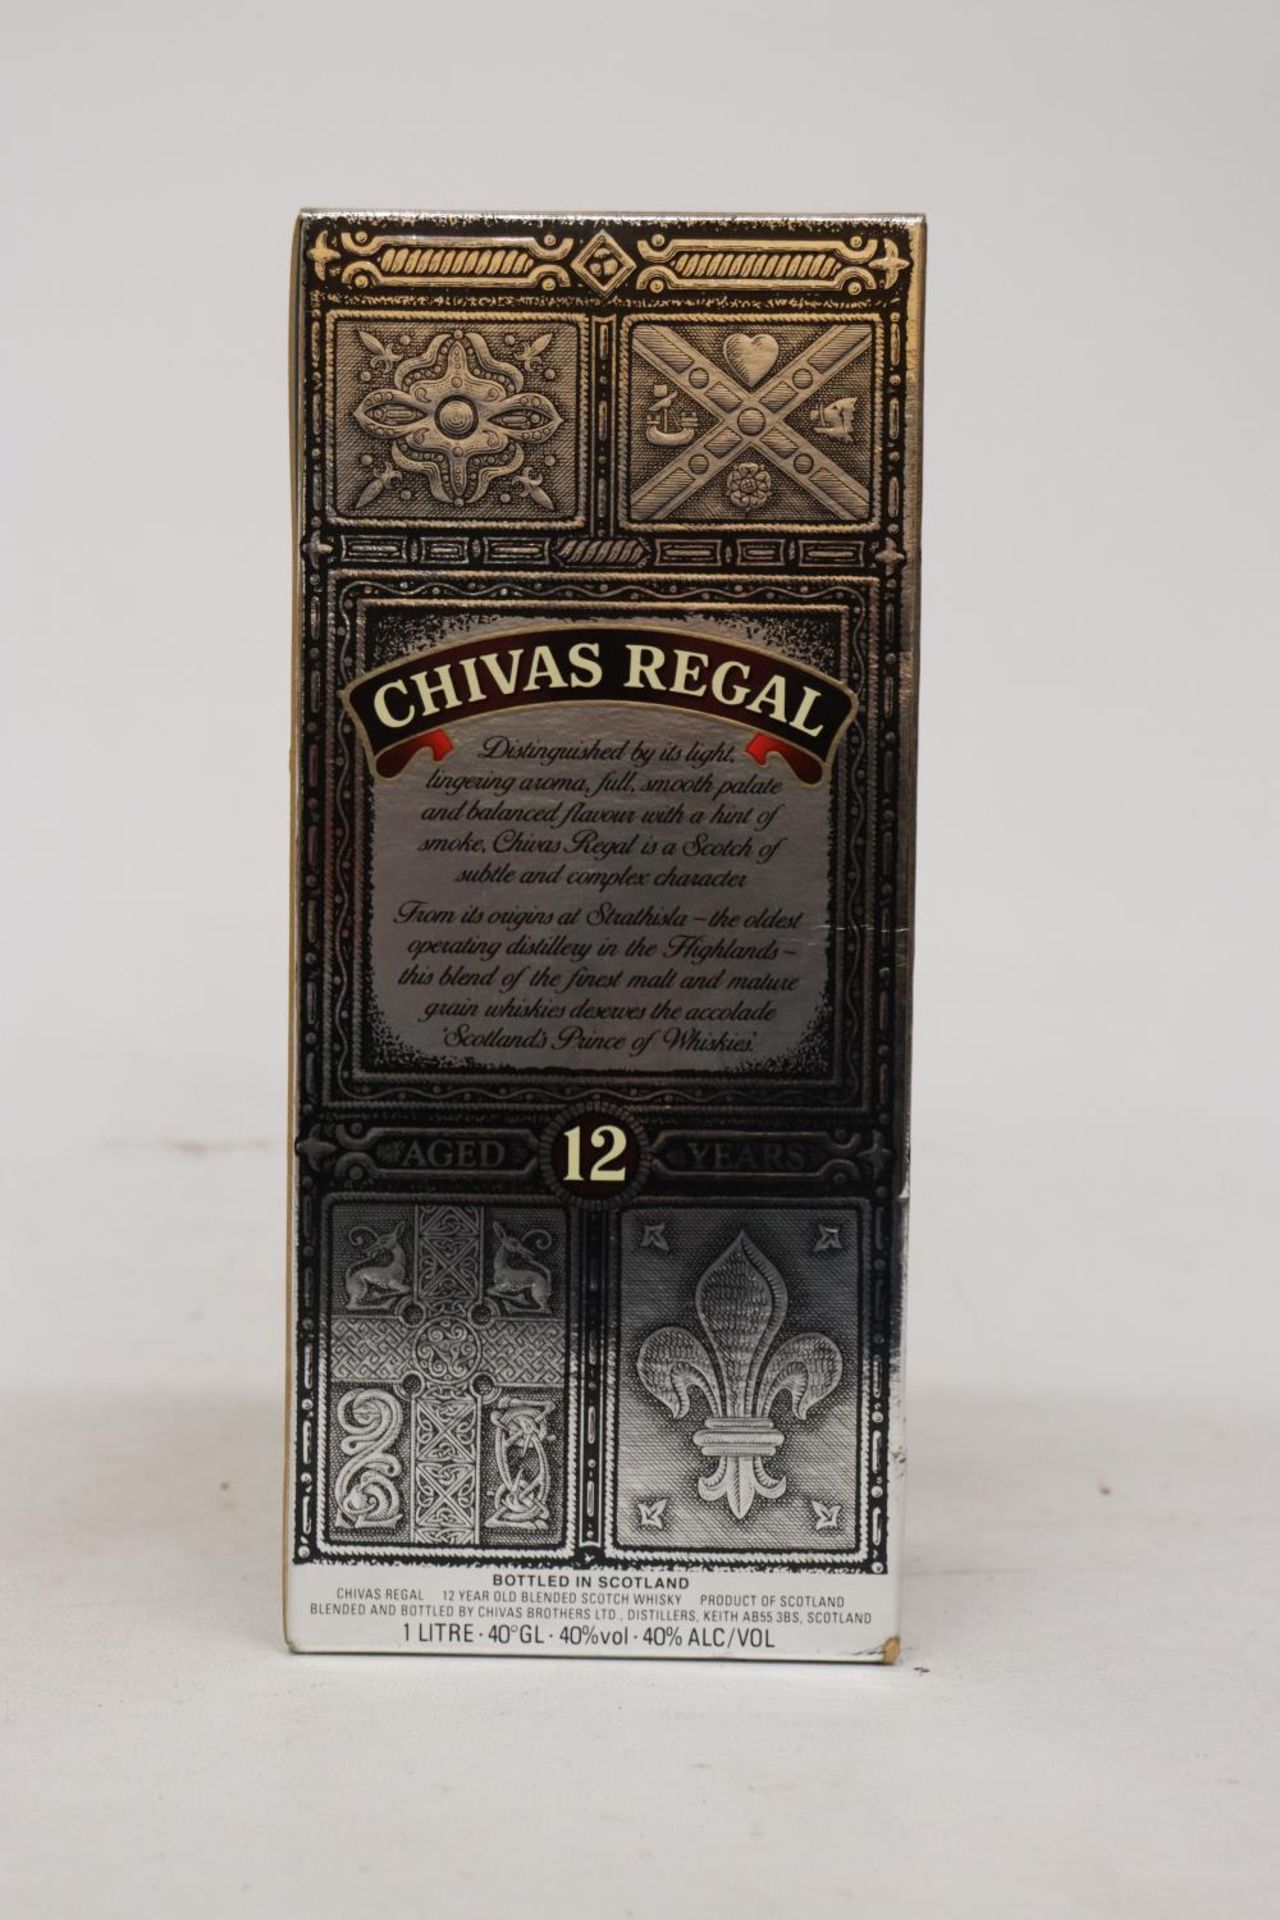 A BOTTLE OF CHIVAS REGAL 12 YEAR OLD WHISKY, BOXED - Image 3 of 5